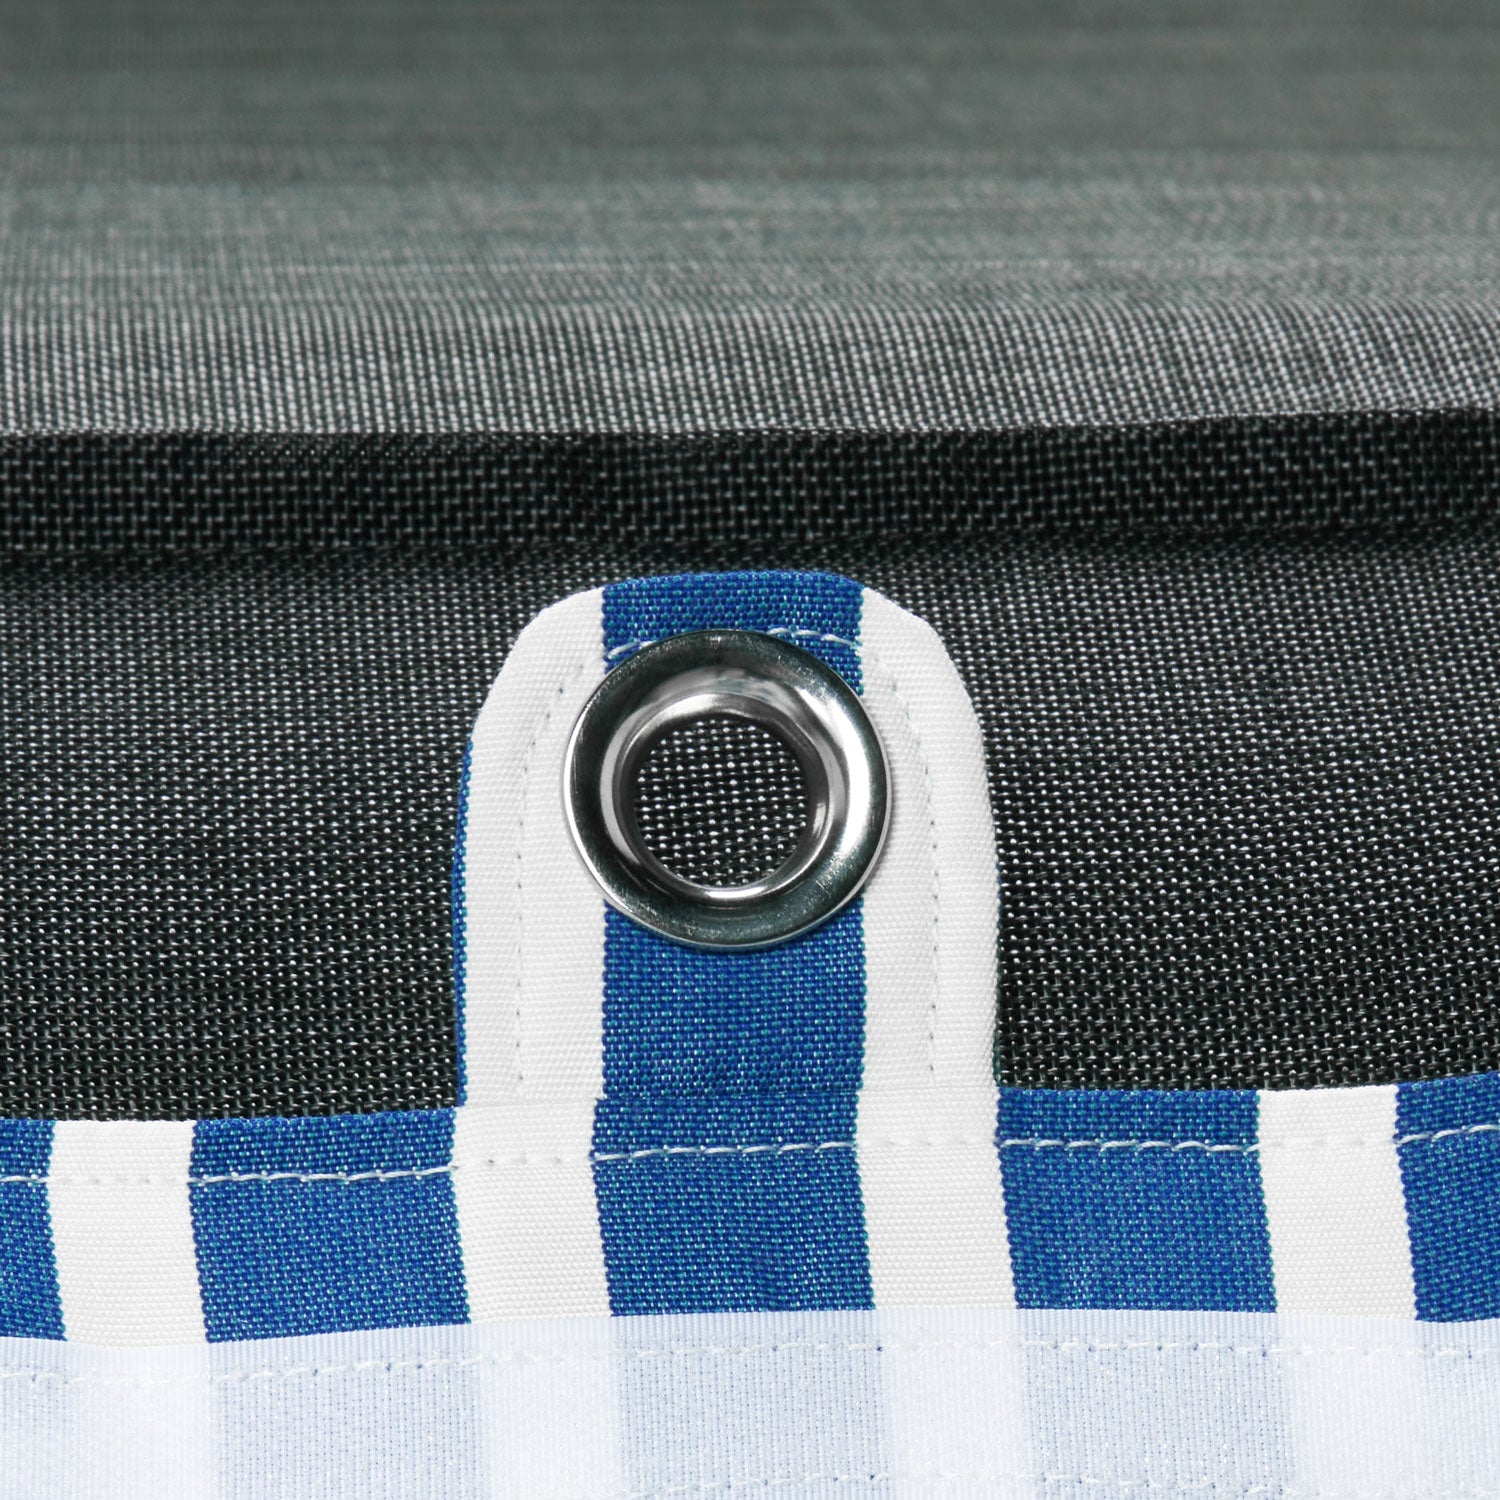 A blue and white stripe fabric pool float for adults upside down displaying the eyelets and base.